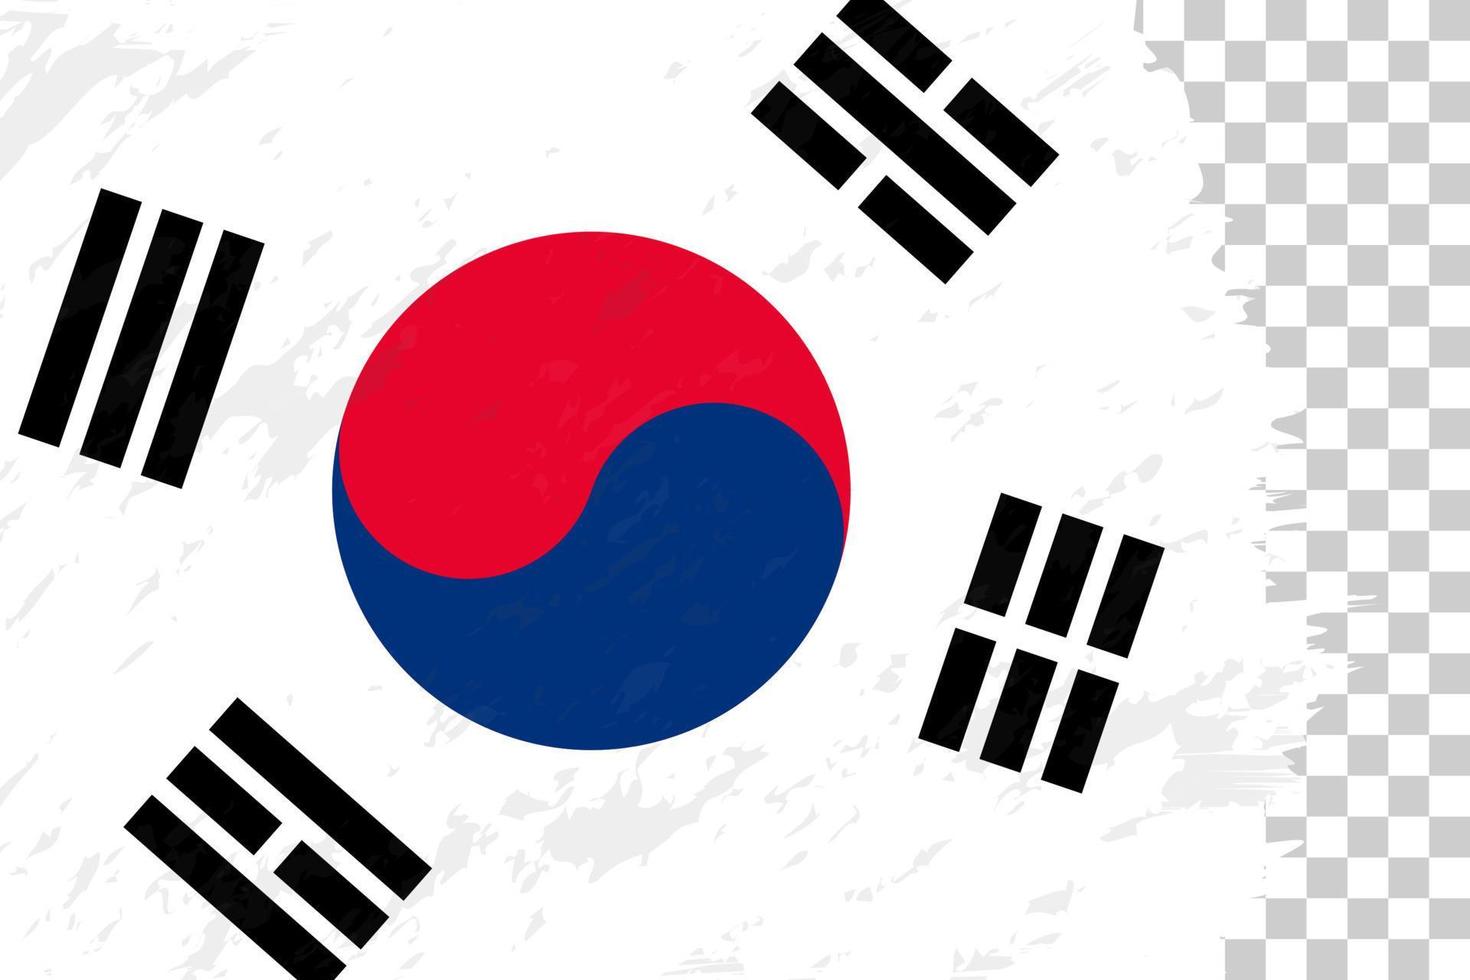 Horizontal Abstract Grunge Brushed Flag of South Korea on Transparent Grid. vector